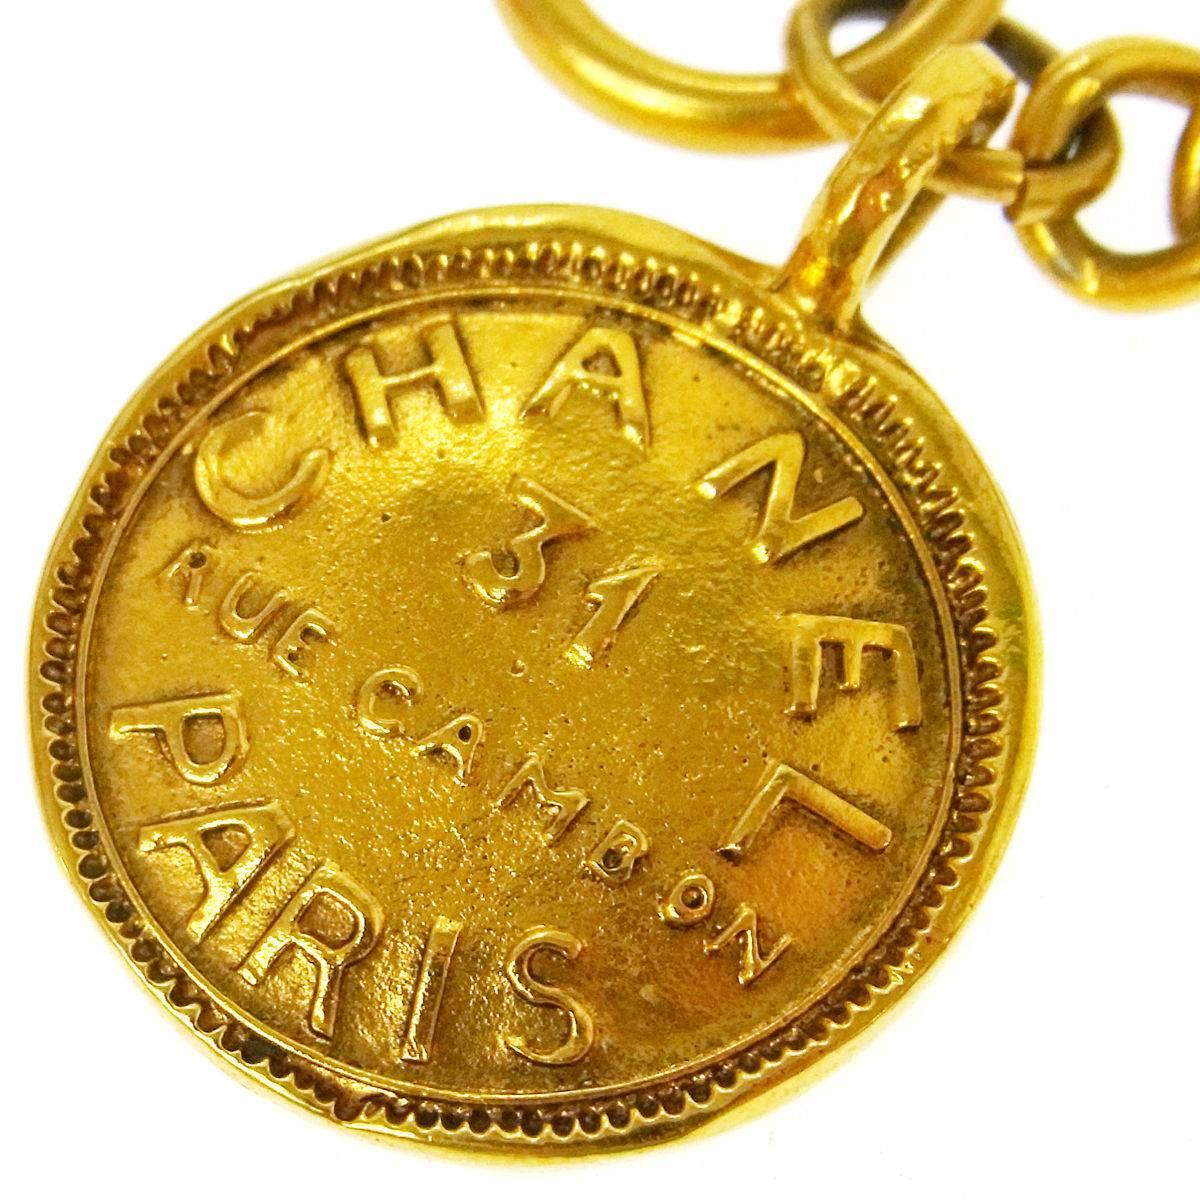 CURATOR'S NOTES

Metal
Gold tone
Lobster claw closure
Made in France
Charm diameter 1.3"
Link length ~9"

Shop Newfound Luxury for authentic pre-owned Chanel charm bracelets.